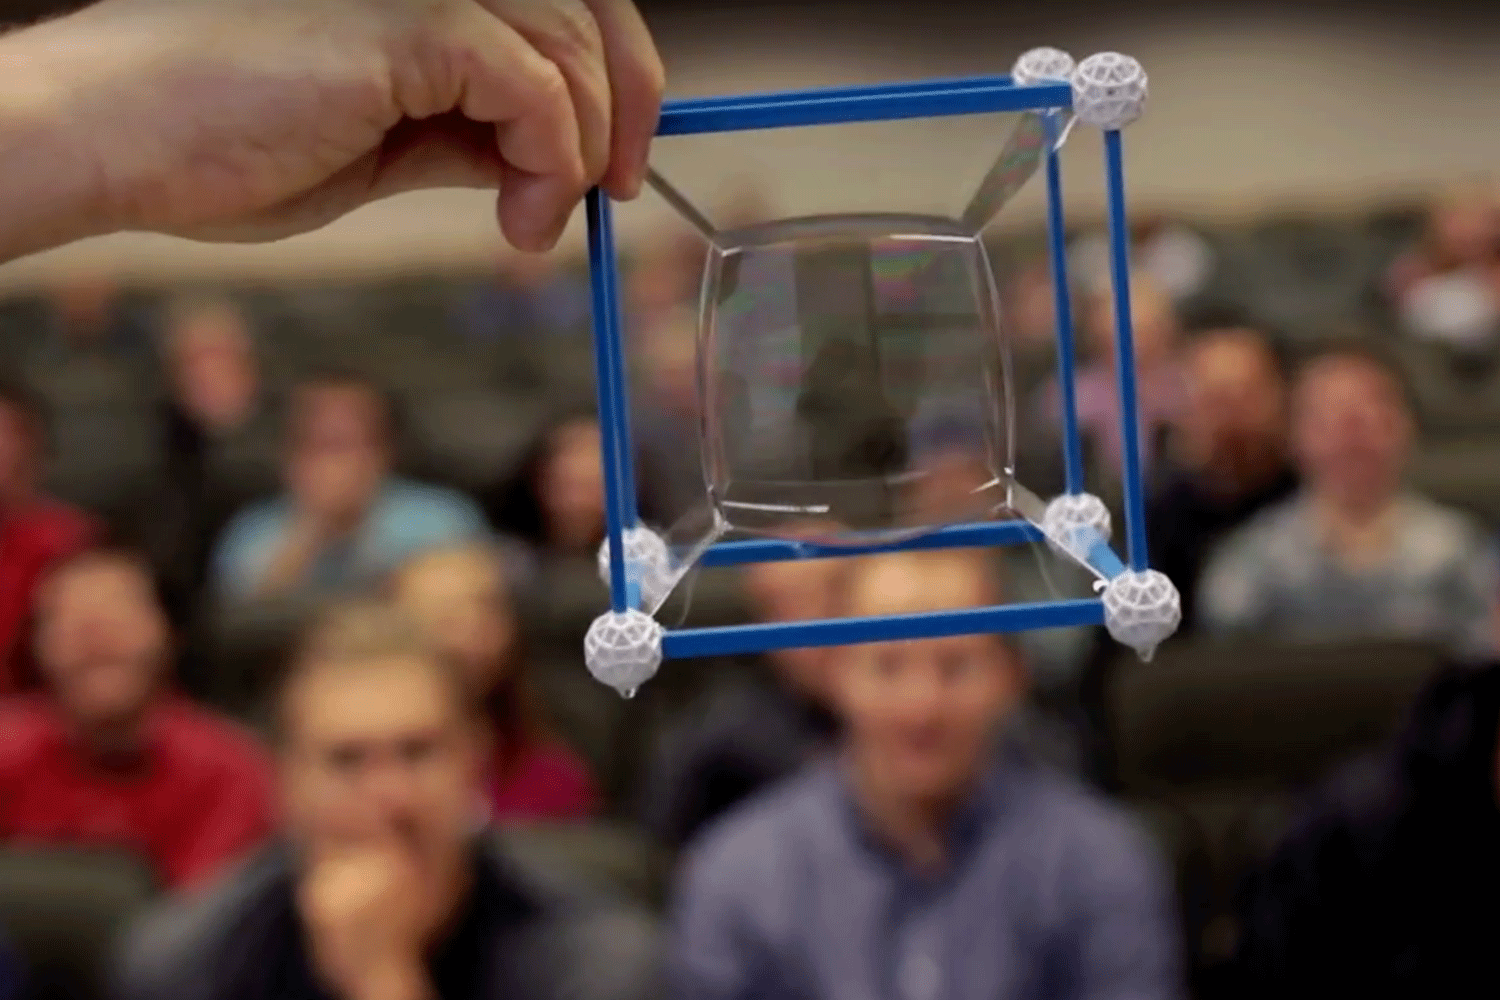 A screenshot from our Micahel Dorff "Thing of Beauty" video on YouTube. The screenshot shows Dorff's outstretched arm holding a cube made of straws. He has dipped the straw cube in a solution of bubbles twice, creating a cube within a cube.